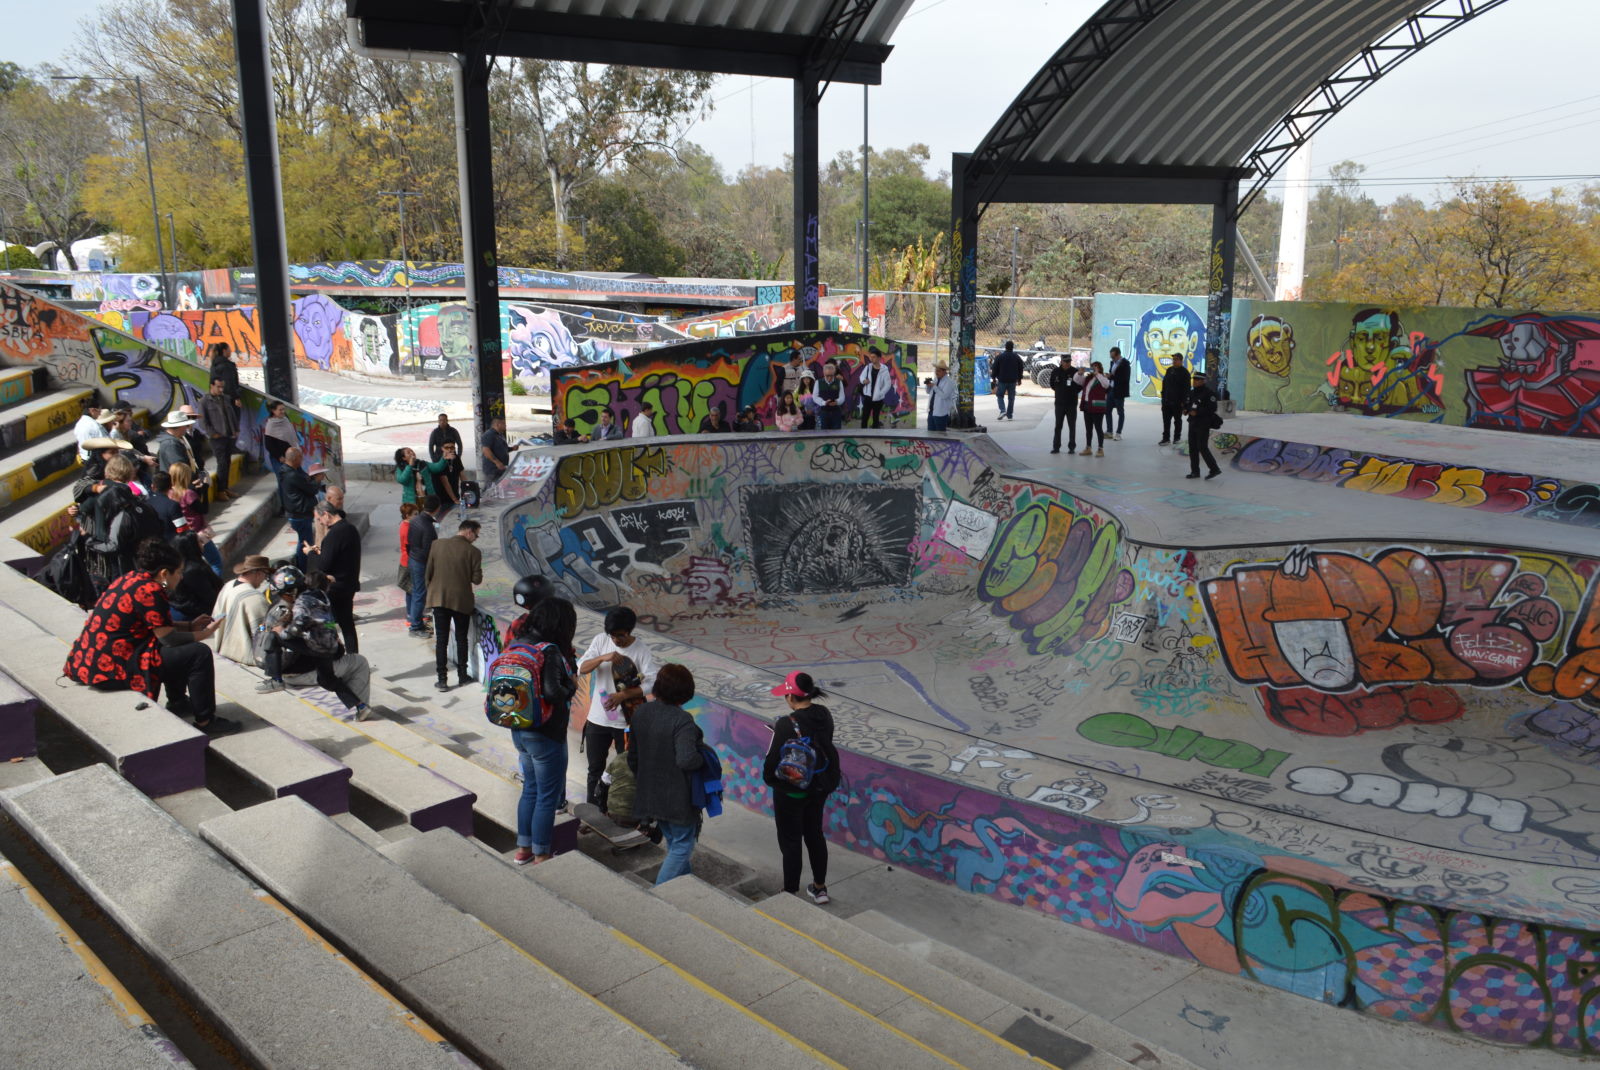 Skate park and graffiti art center at the abandoned facilities of two former water parks. © Leigh Thelmadatter.